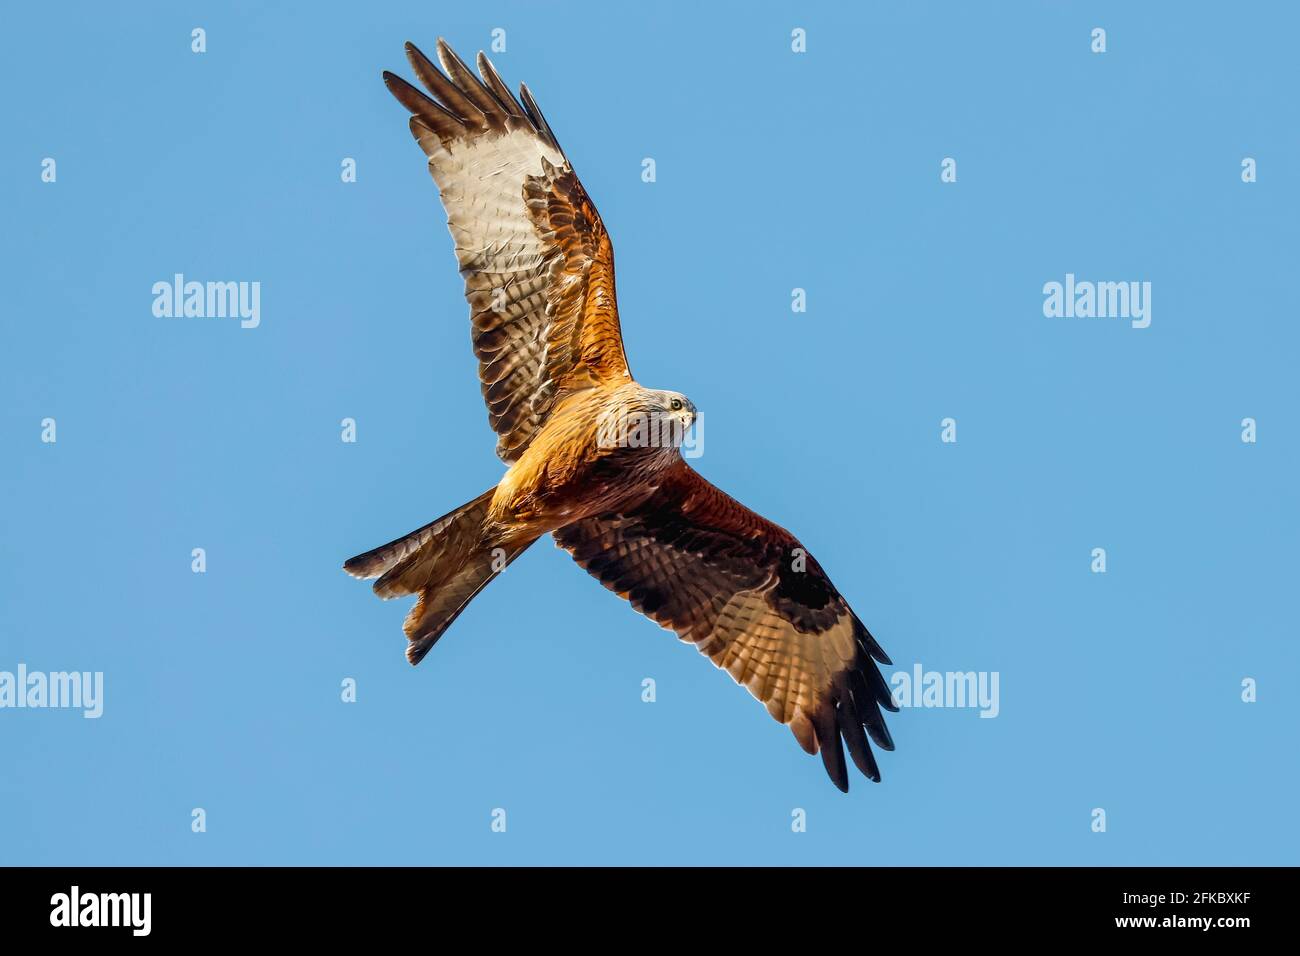 Red kite (Milvus milvus) bird of prey in flight, once endangered but now common in the Chilterns, Turville, Oxfordshire, England, United Kingdom Stock Photo